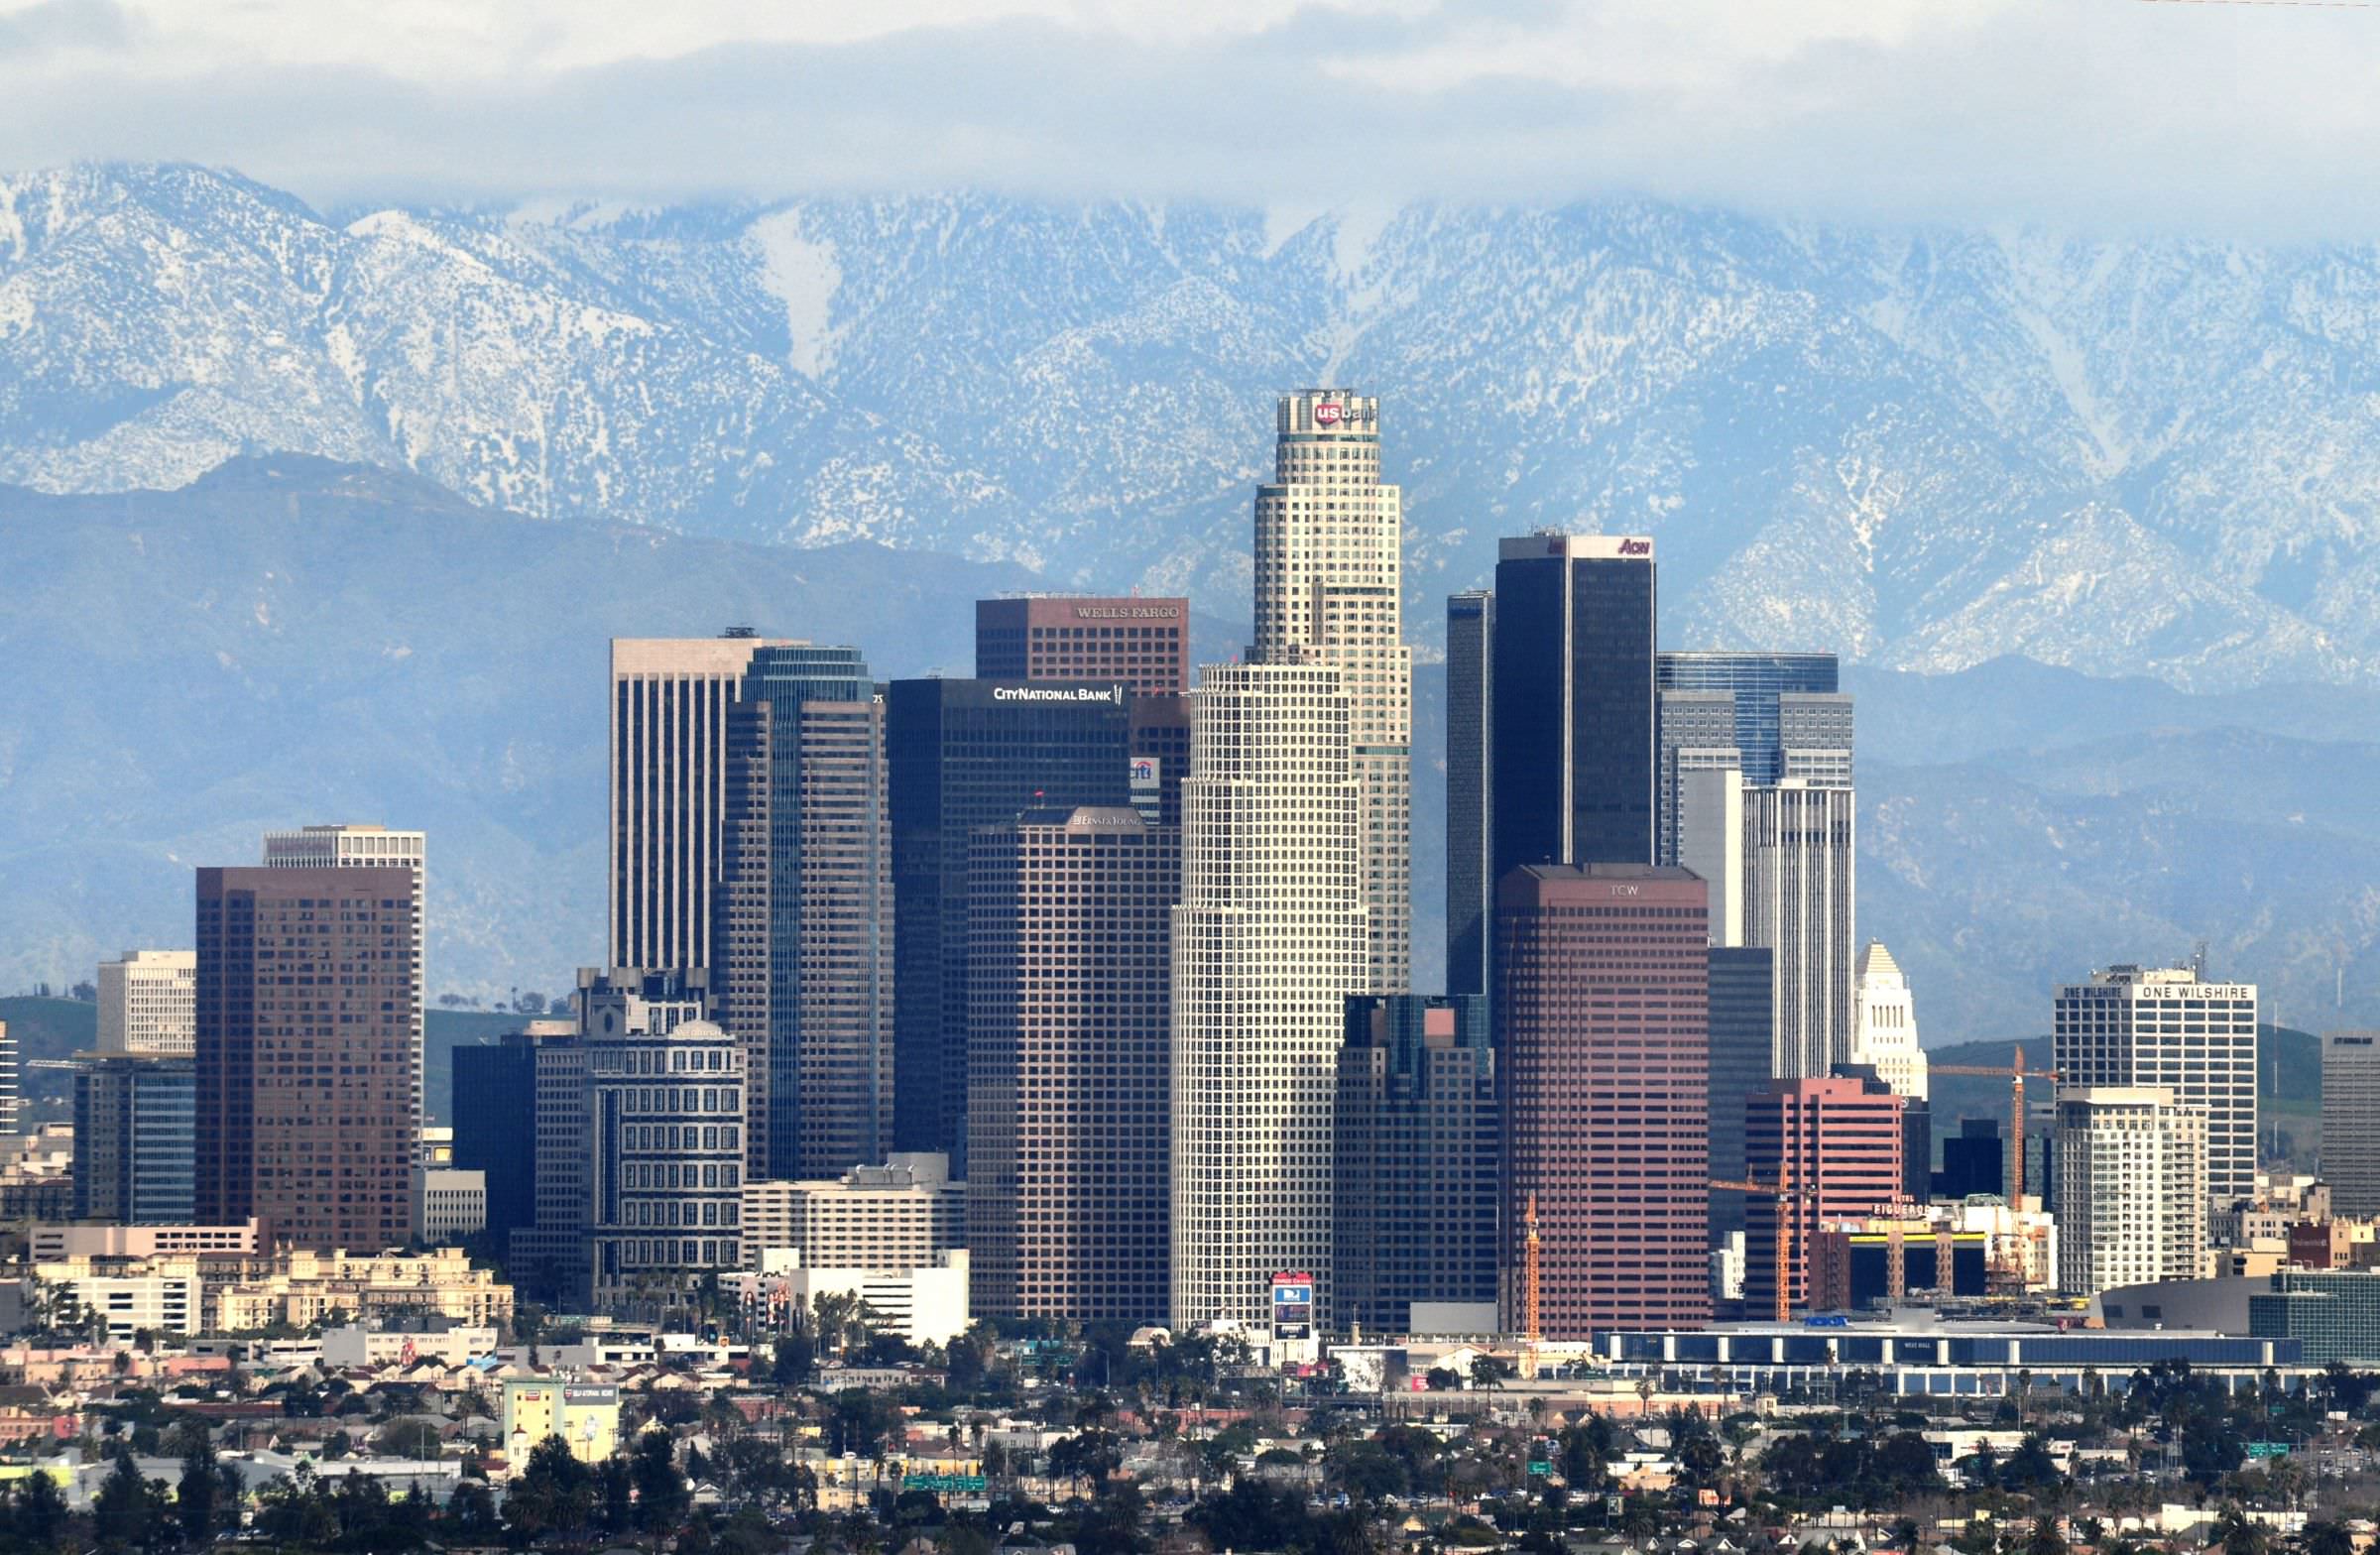 A 7 day Los Angeles itinerary for happy holidays